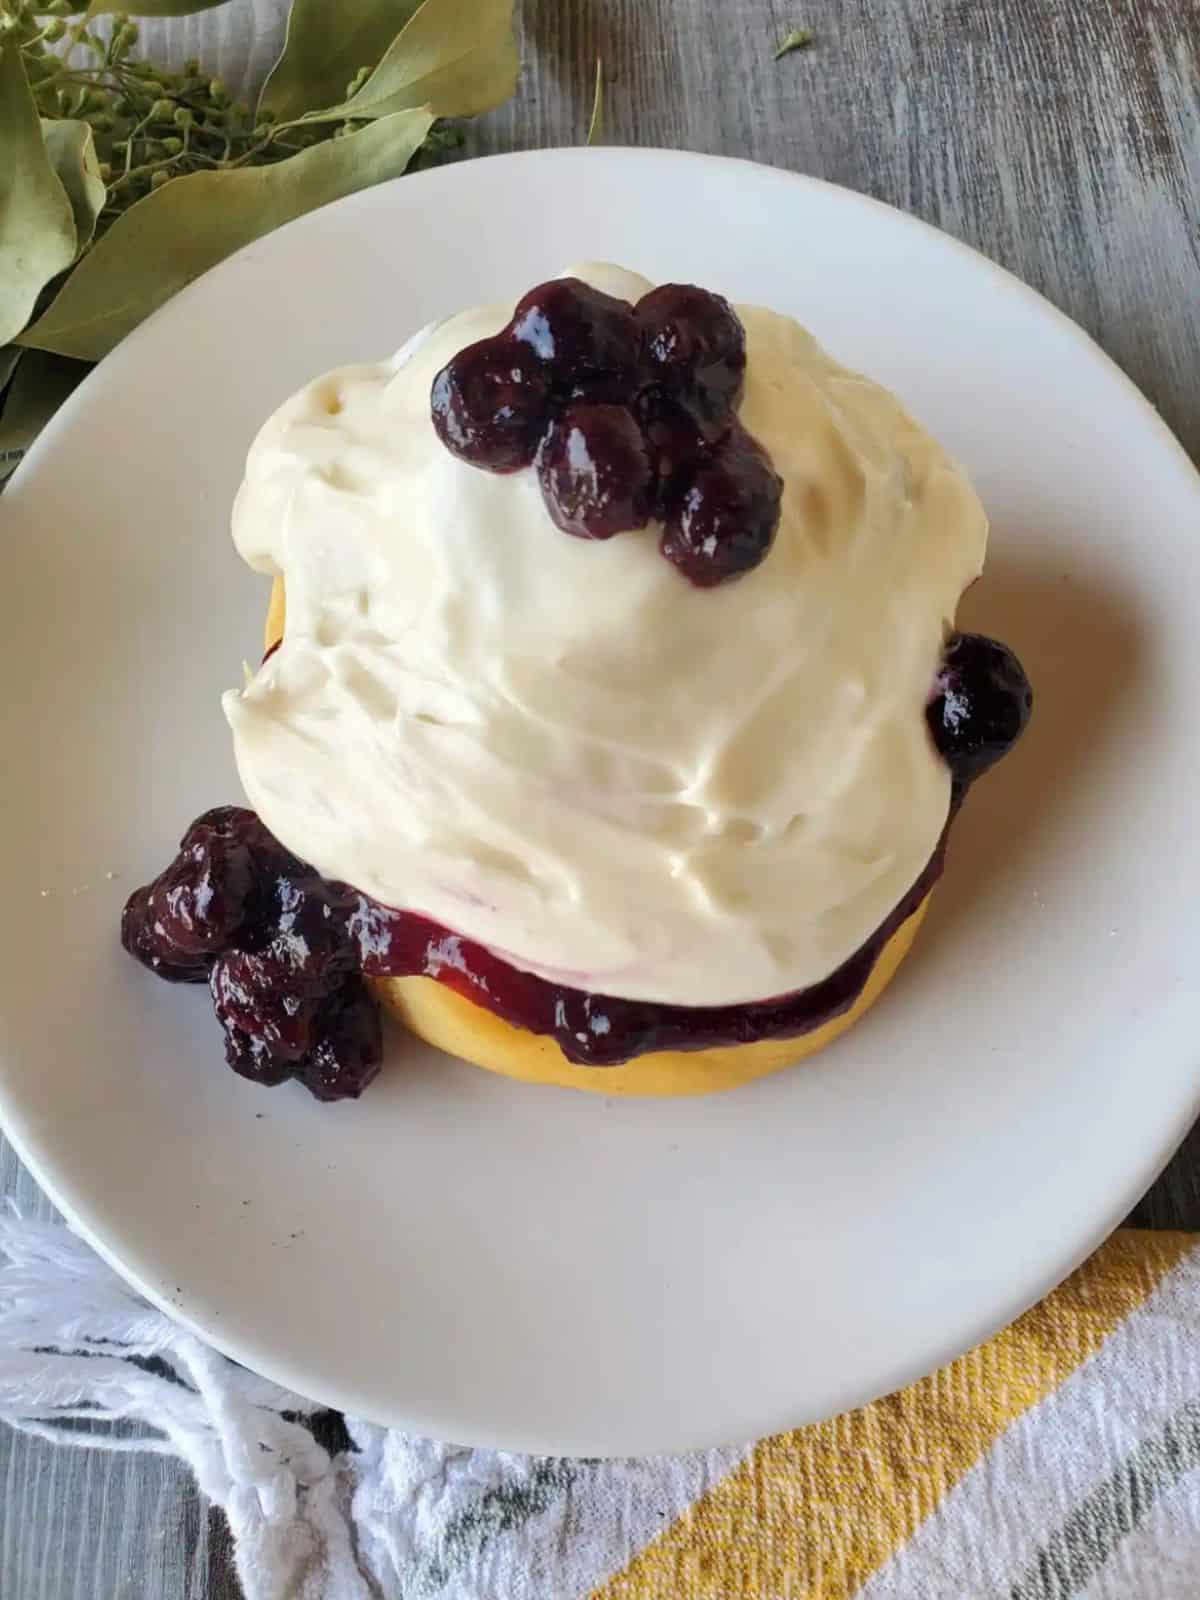 homemade blueberry cinnamon rolls topped with a generous cream cheese frosting and juicy blueberries.